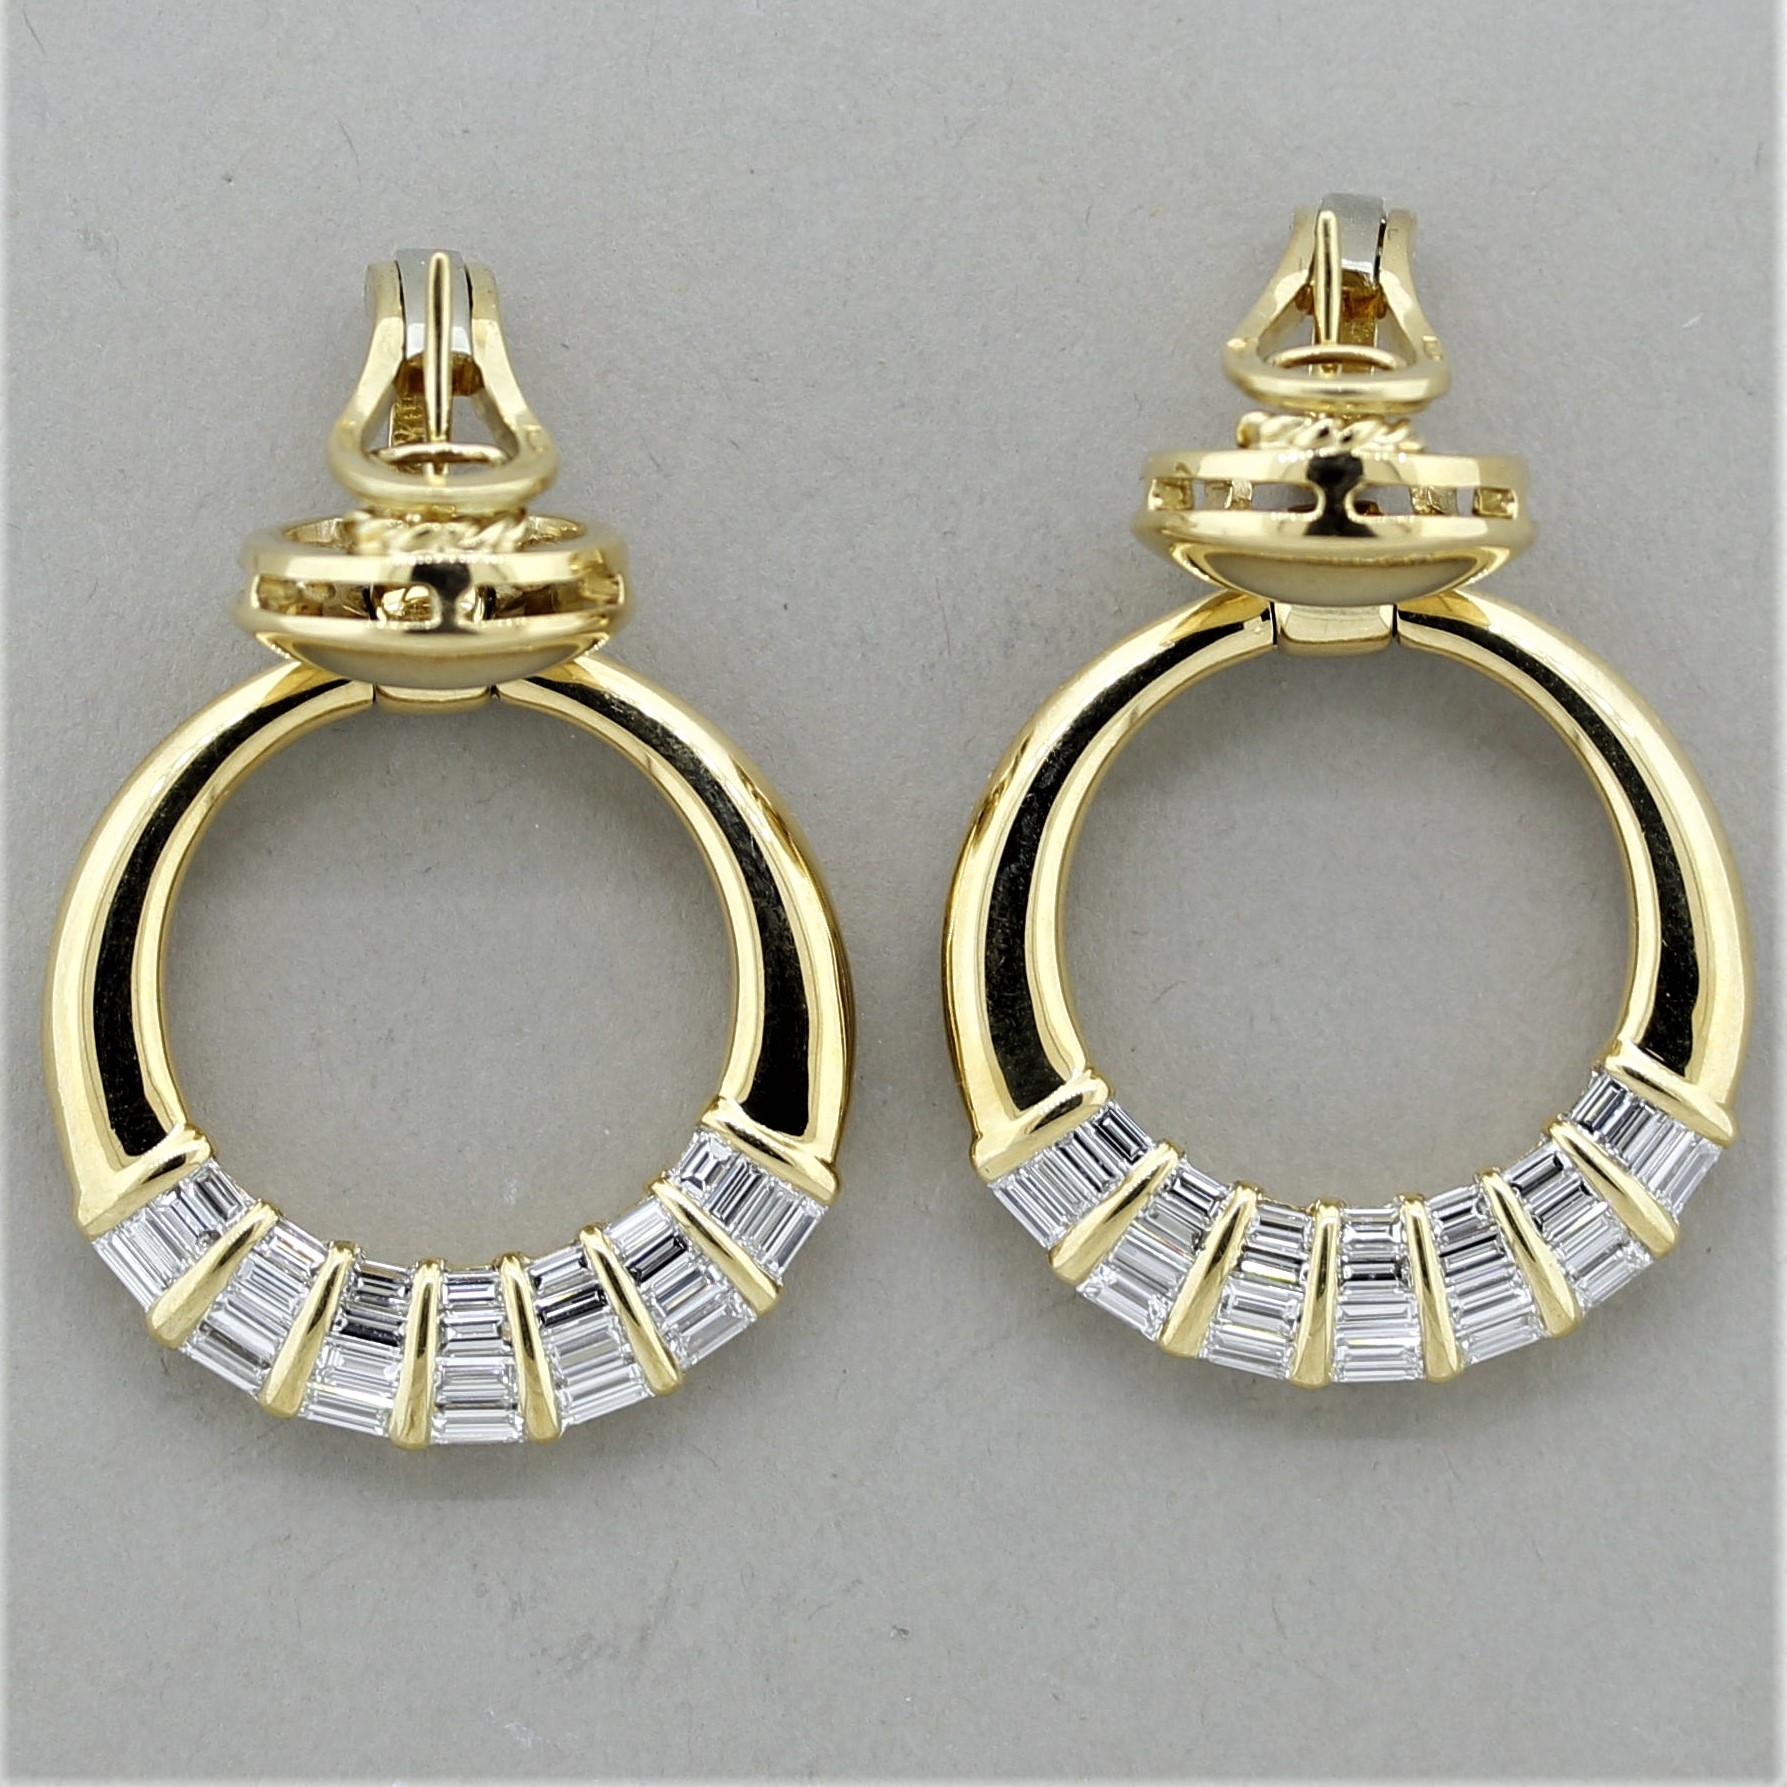 A special pair of door knocker earrings made in Italy! They feature 5 carats of exceptionally fine baguette-cut diamonds which are channel set in graduating sizes. They are VVS in clarity and F in color, top quality stones. The hoops move and sway